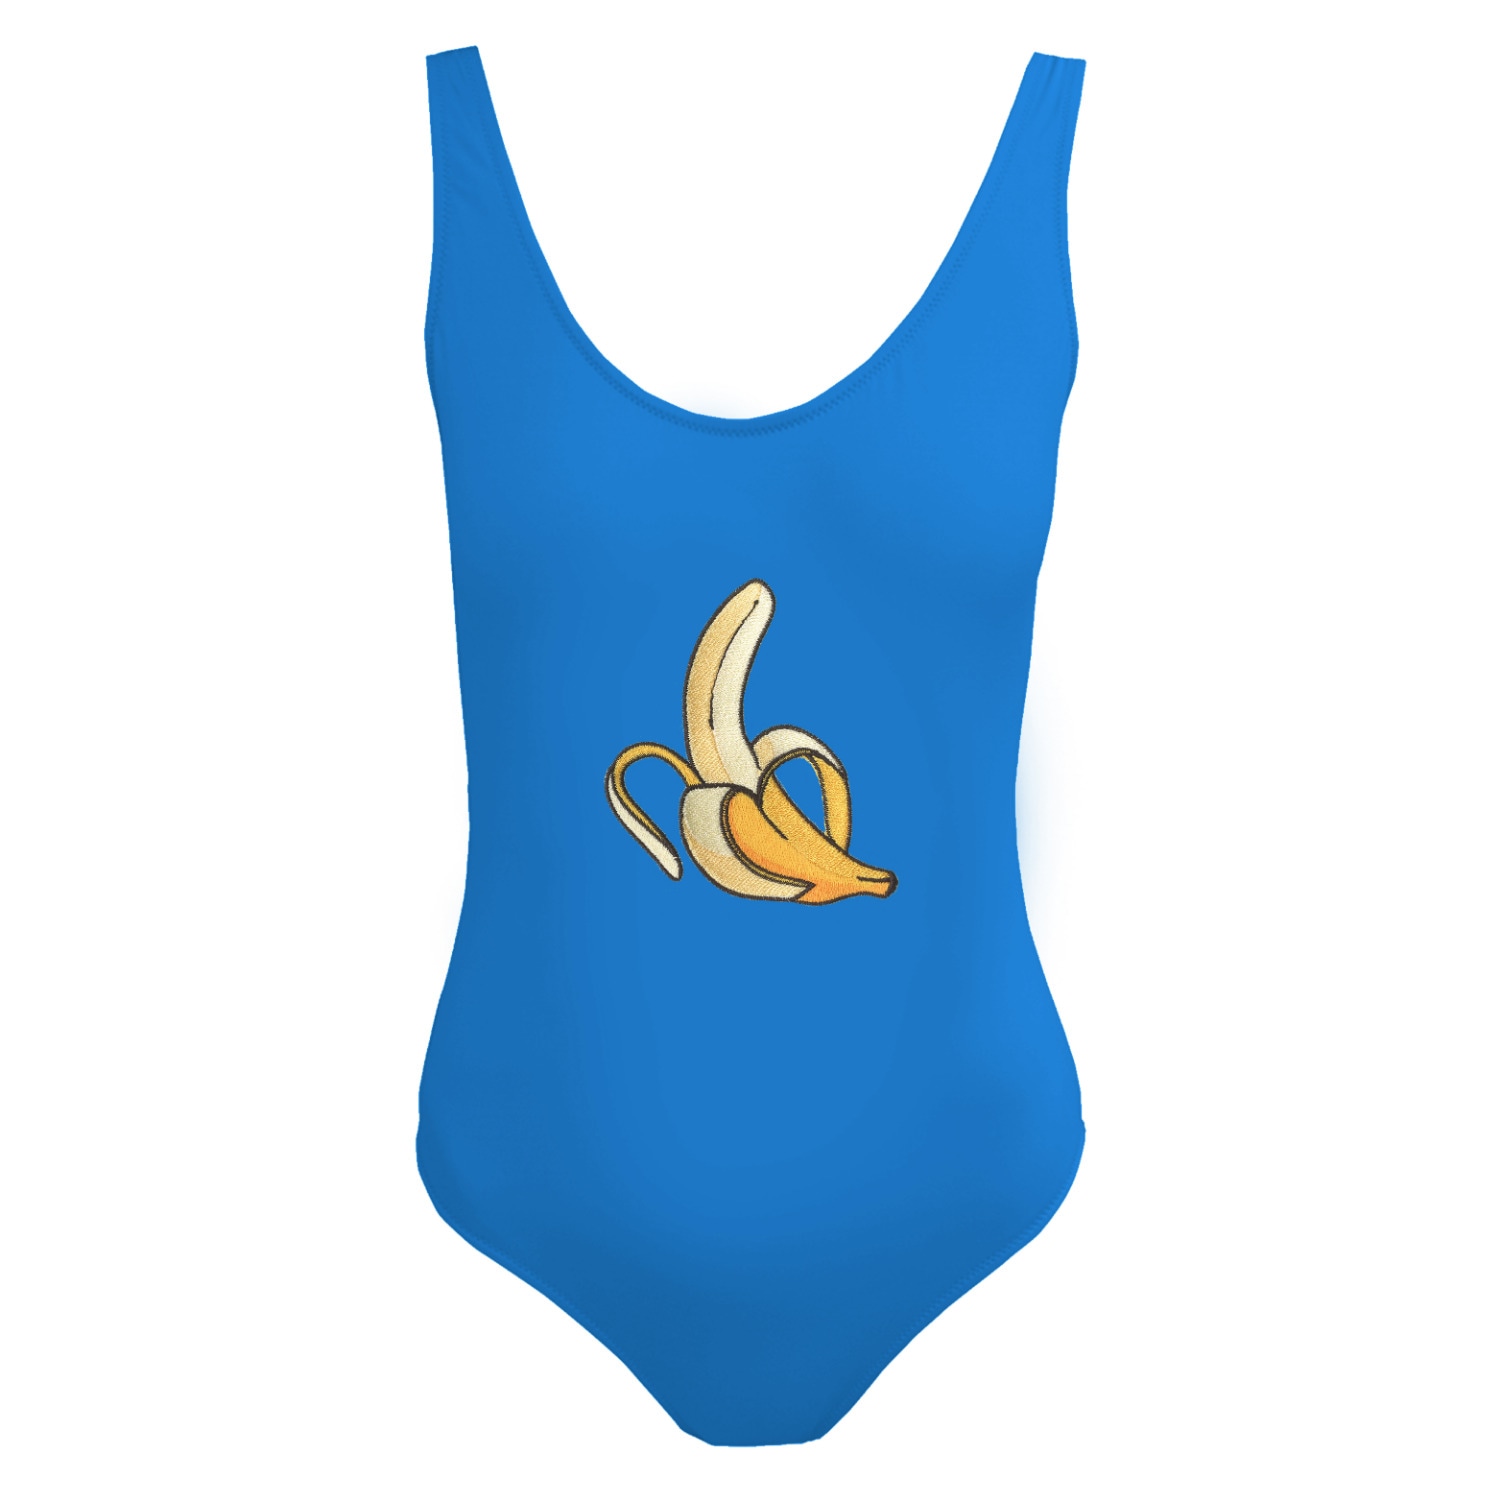 Women's Yellow / Orange / Blue Banana One-Piece Swimsuit Small My Pair of Jeans